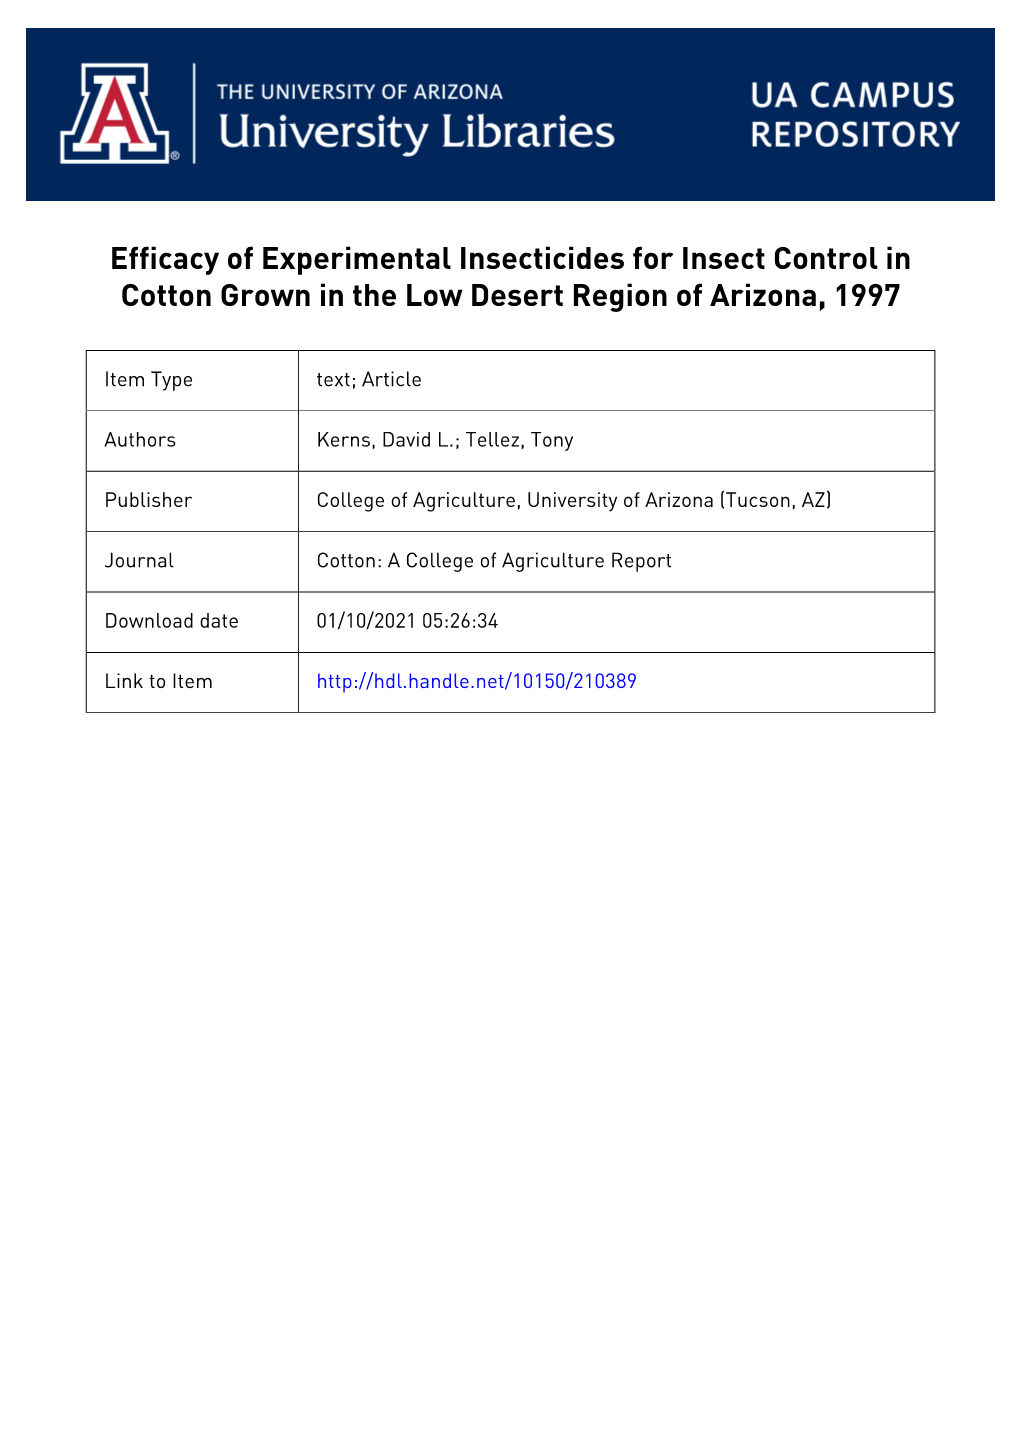 Efficacy of Experimental Insecticides for Insect Control in Cotton Grown in the Low Desert Region of Arizona, 1997